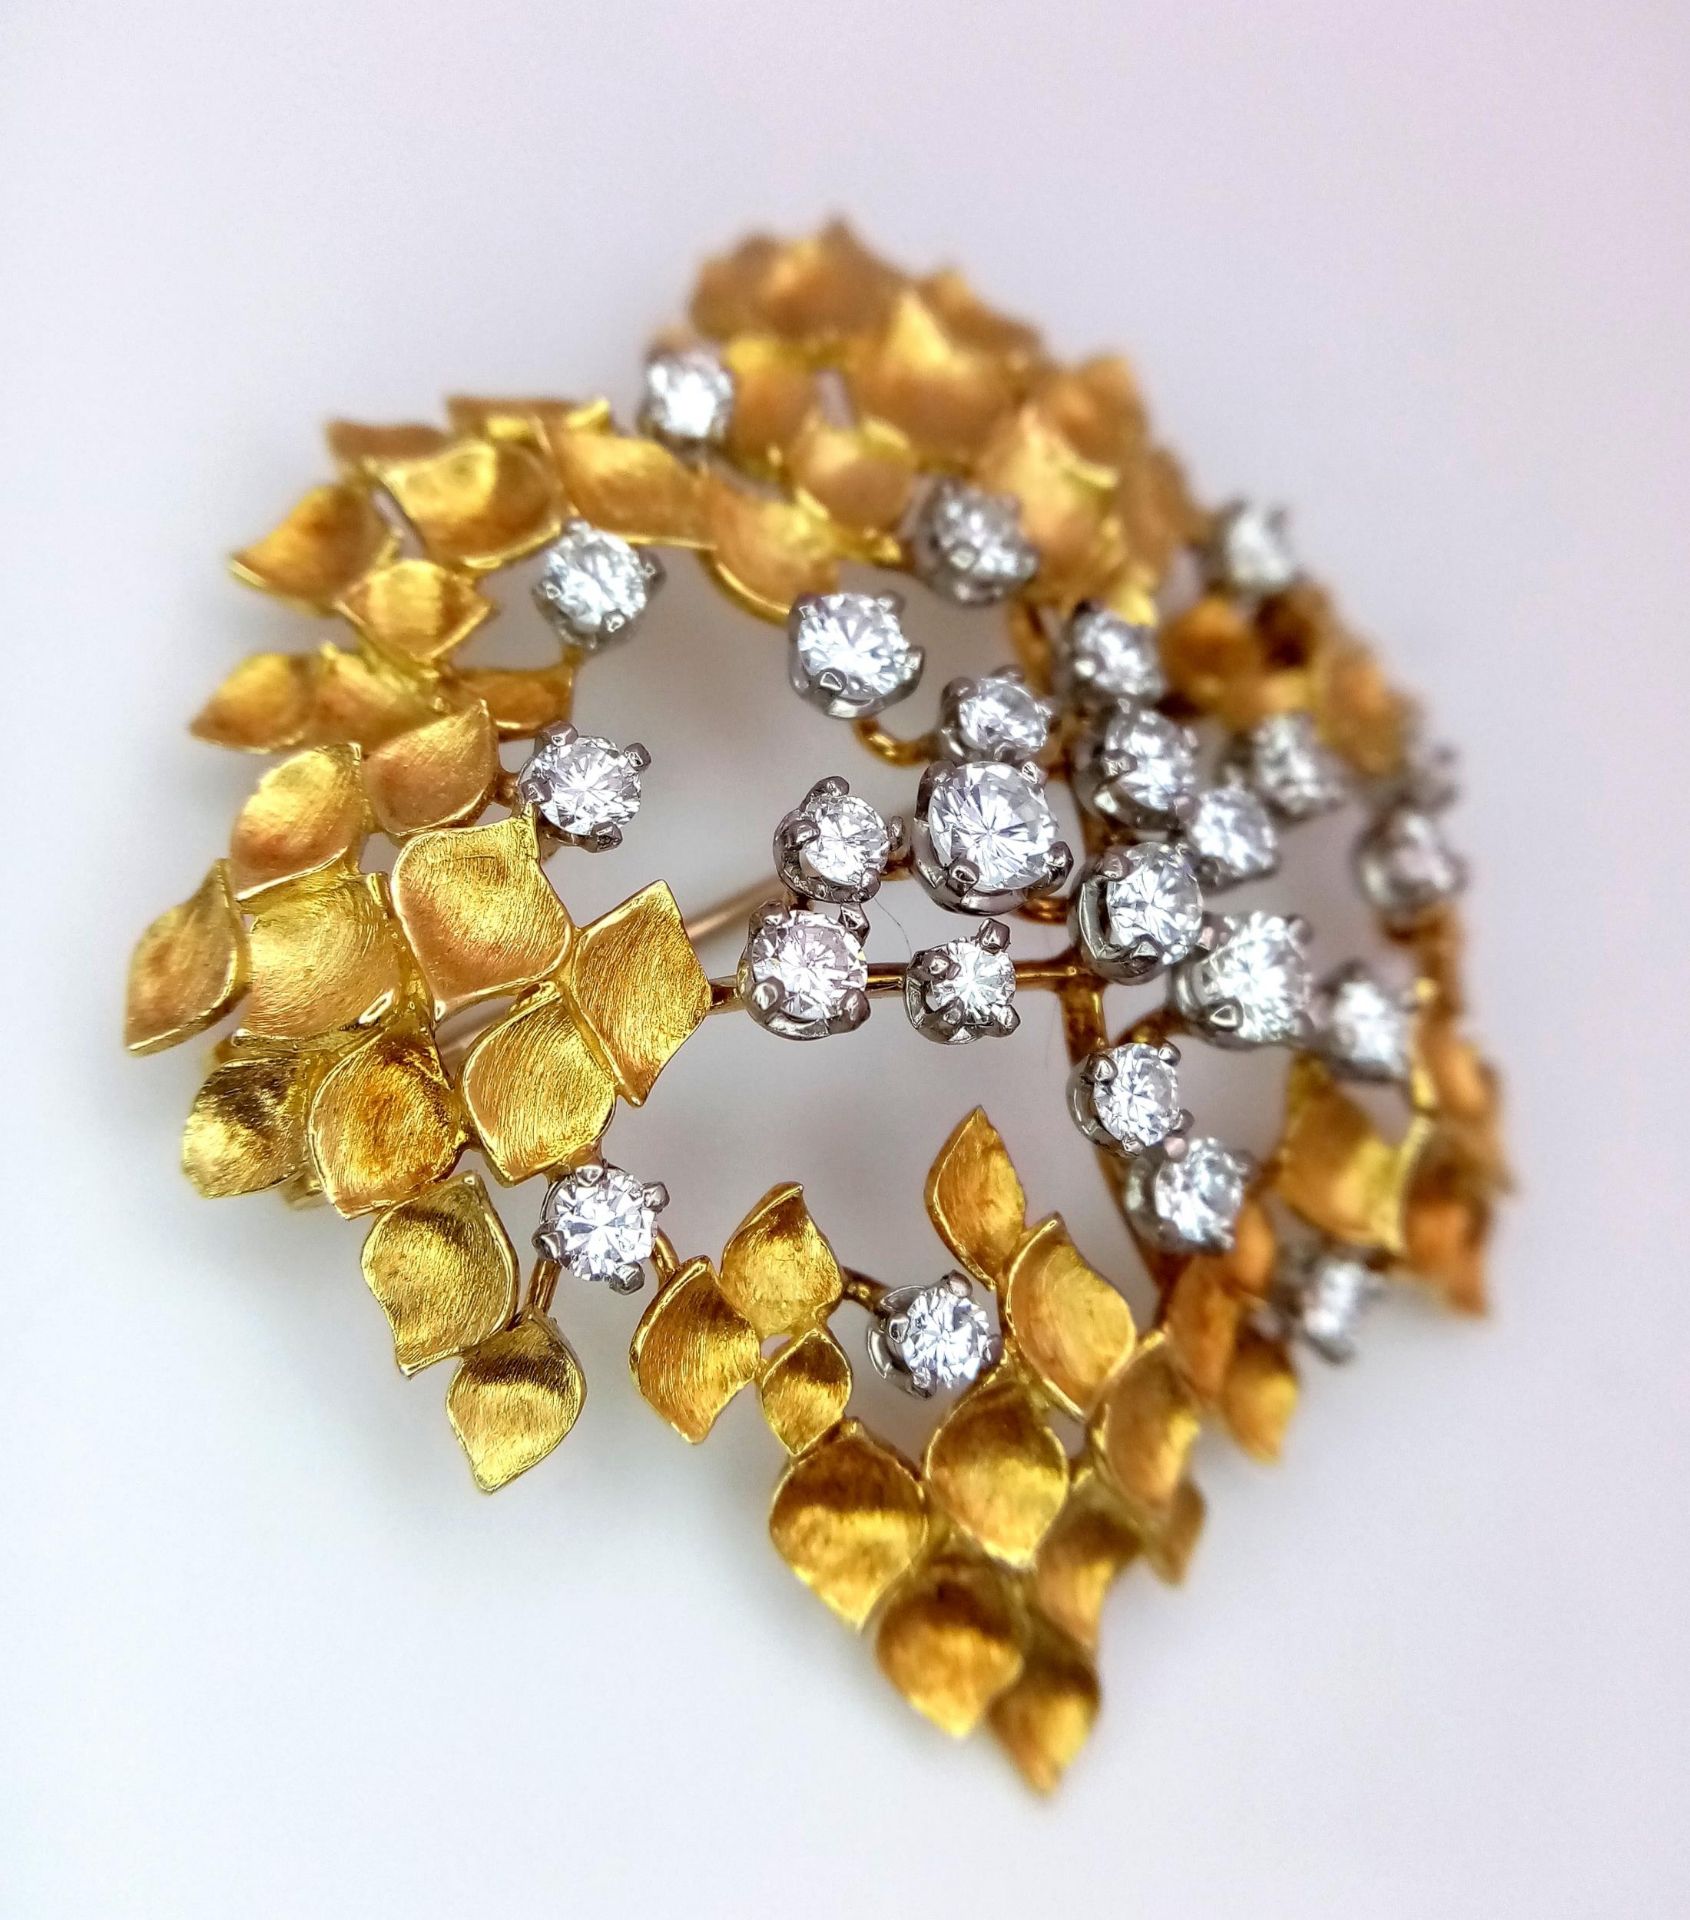 A Magical 18K Yellow Gold and Diamond Brooch. 1.5ctw of brilliant round cut diamonds amongst - Image 2 of 7